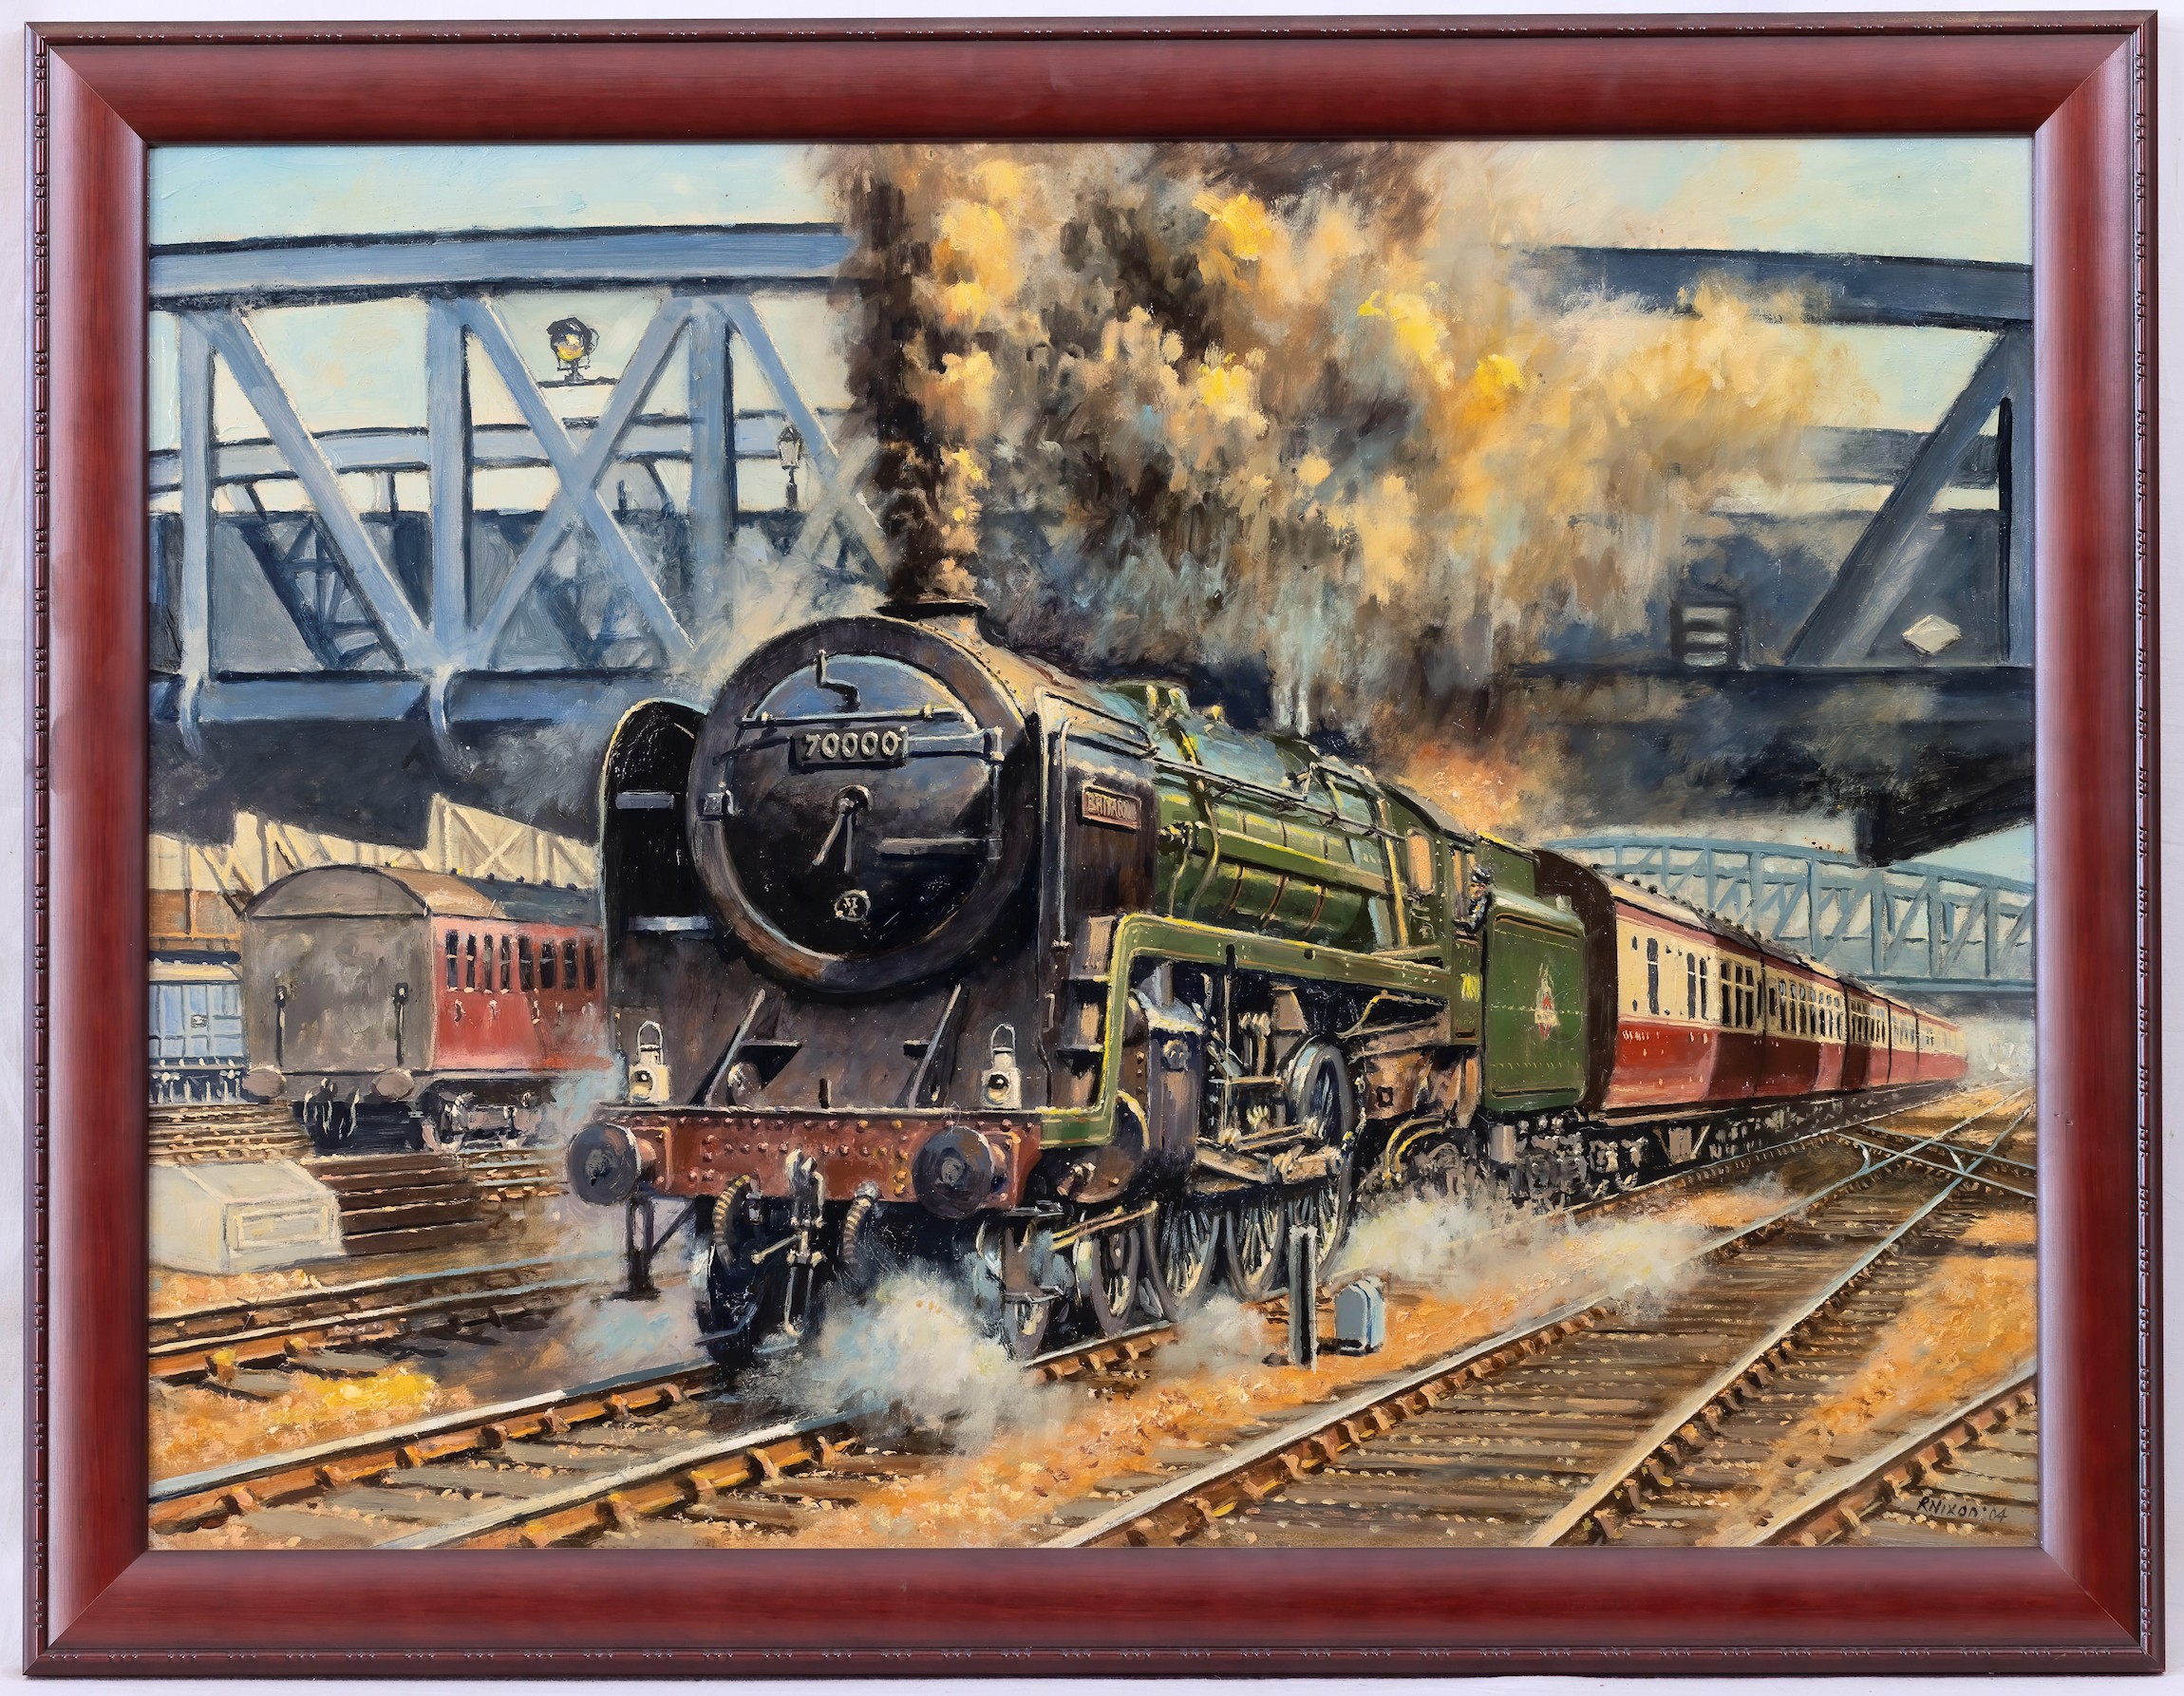 Robert Nixon (British, b. 1955), ‘A’ 7MT Class Steam Engine 70000. oil on board, signed lower right, - Image 2 of 2